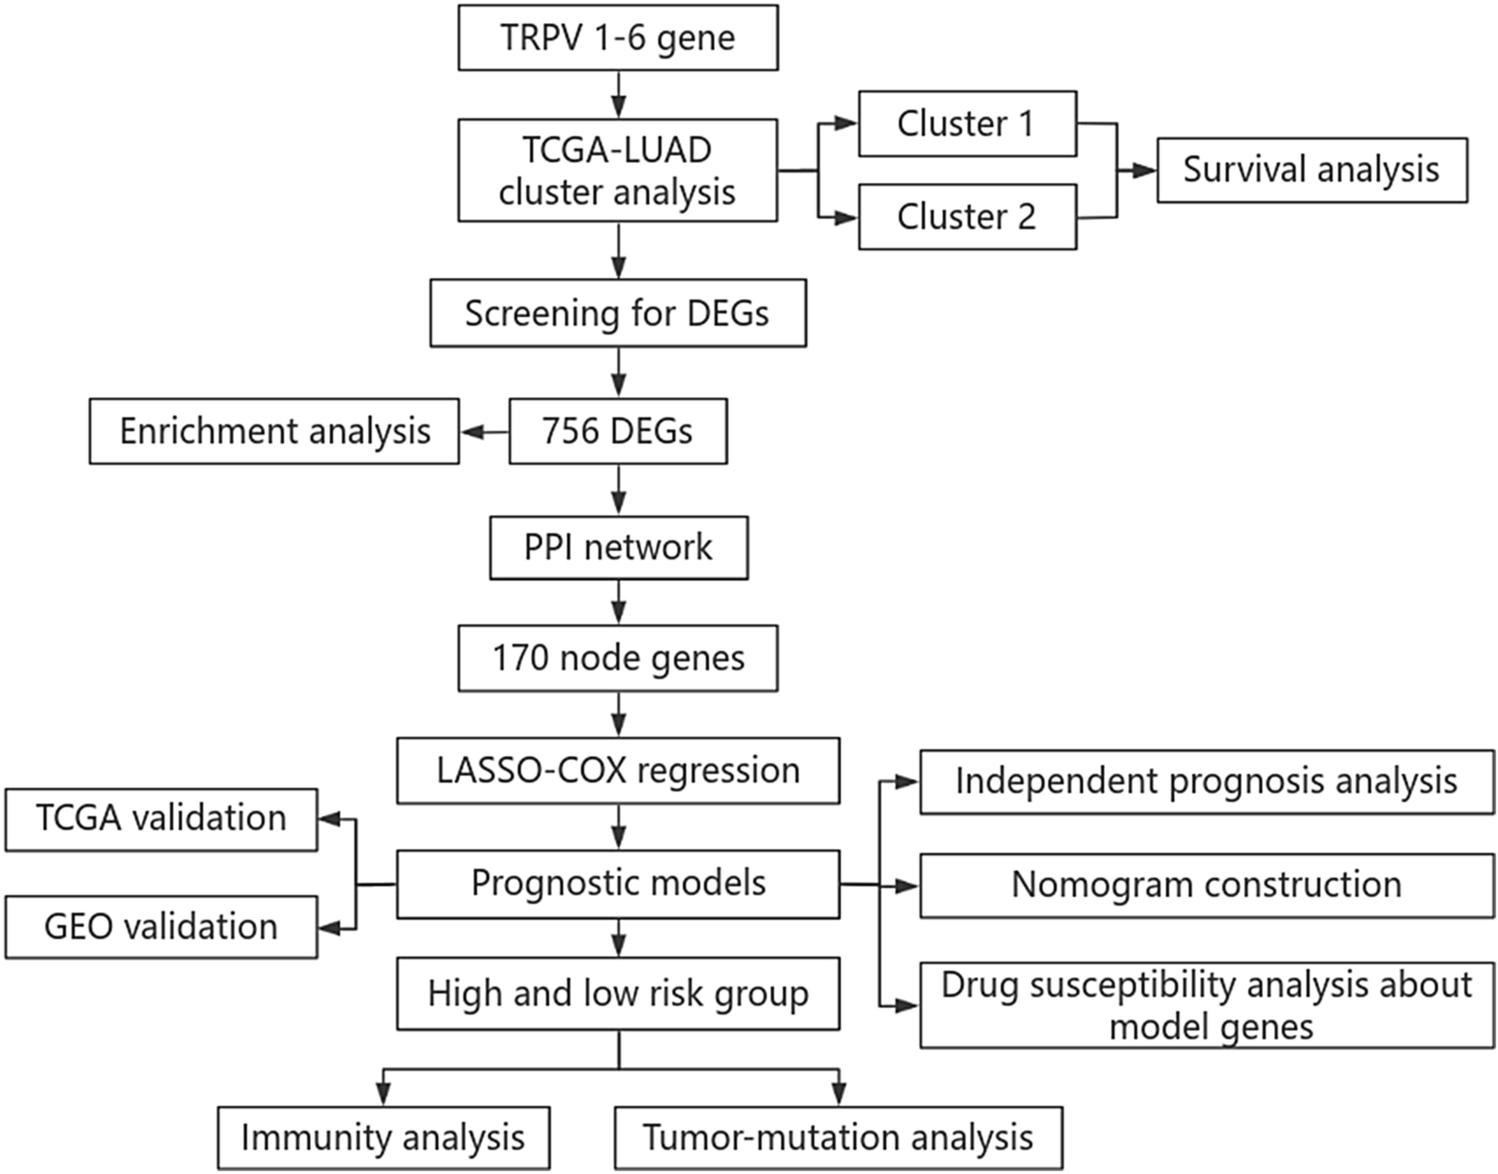 Identification of Prognostic and Immune Characteristics of Two Lung Adenocarcinoma Subtypes Based on TRPV Channel Family Genes